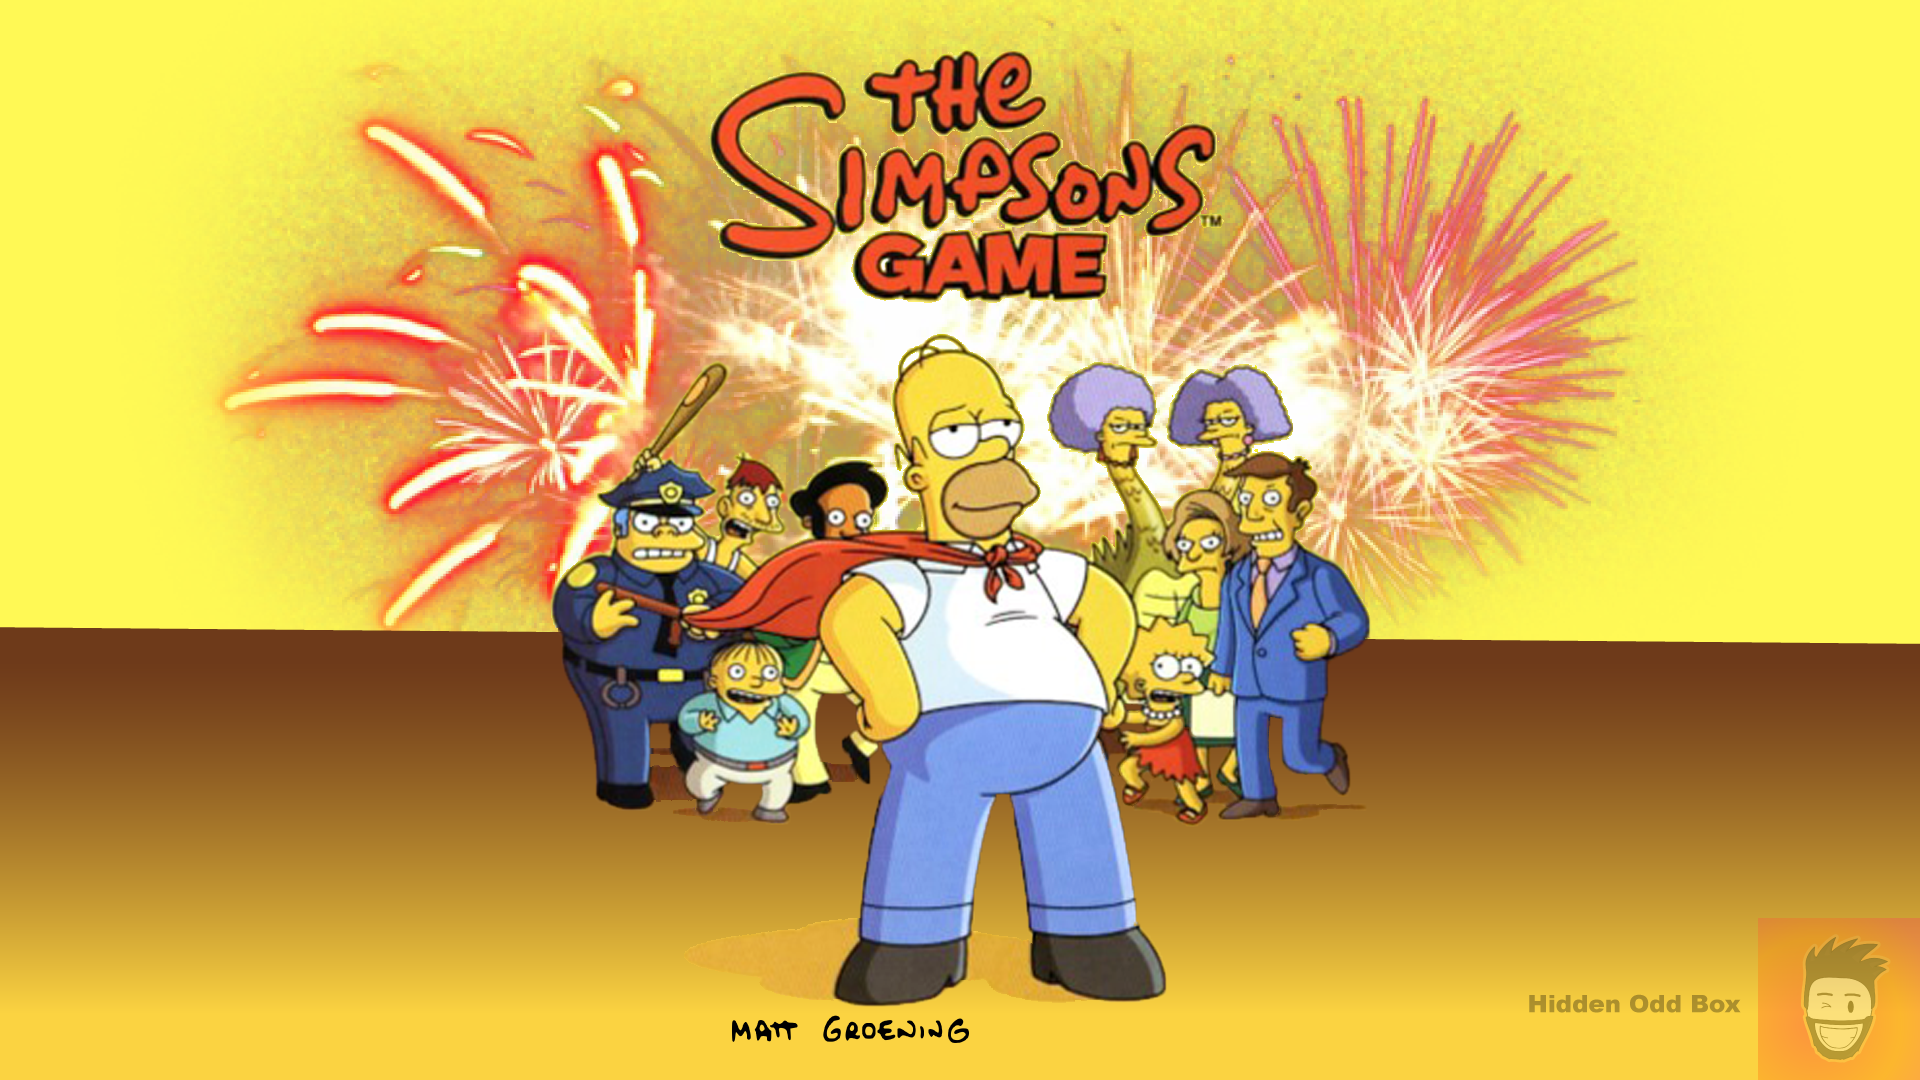 The Simpsons Game came out October 2007!